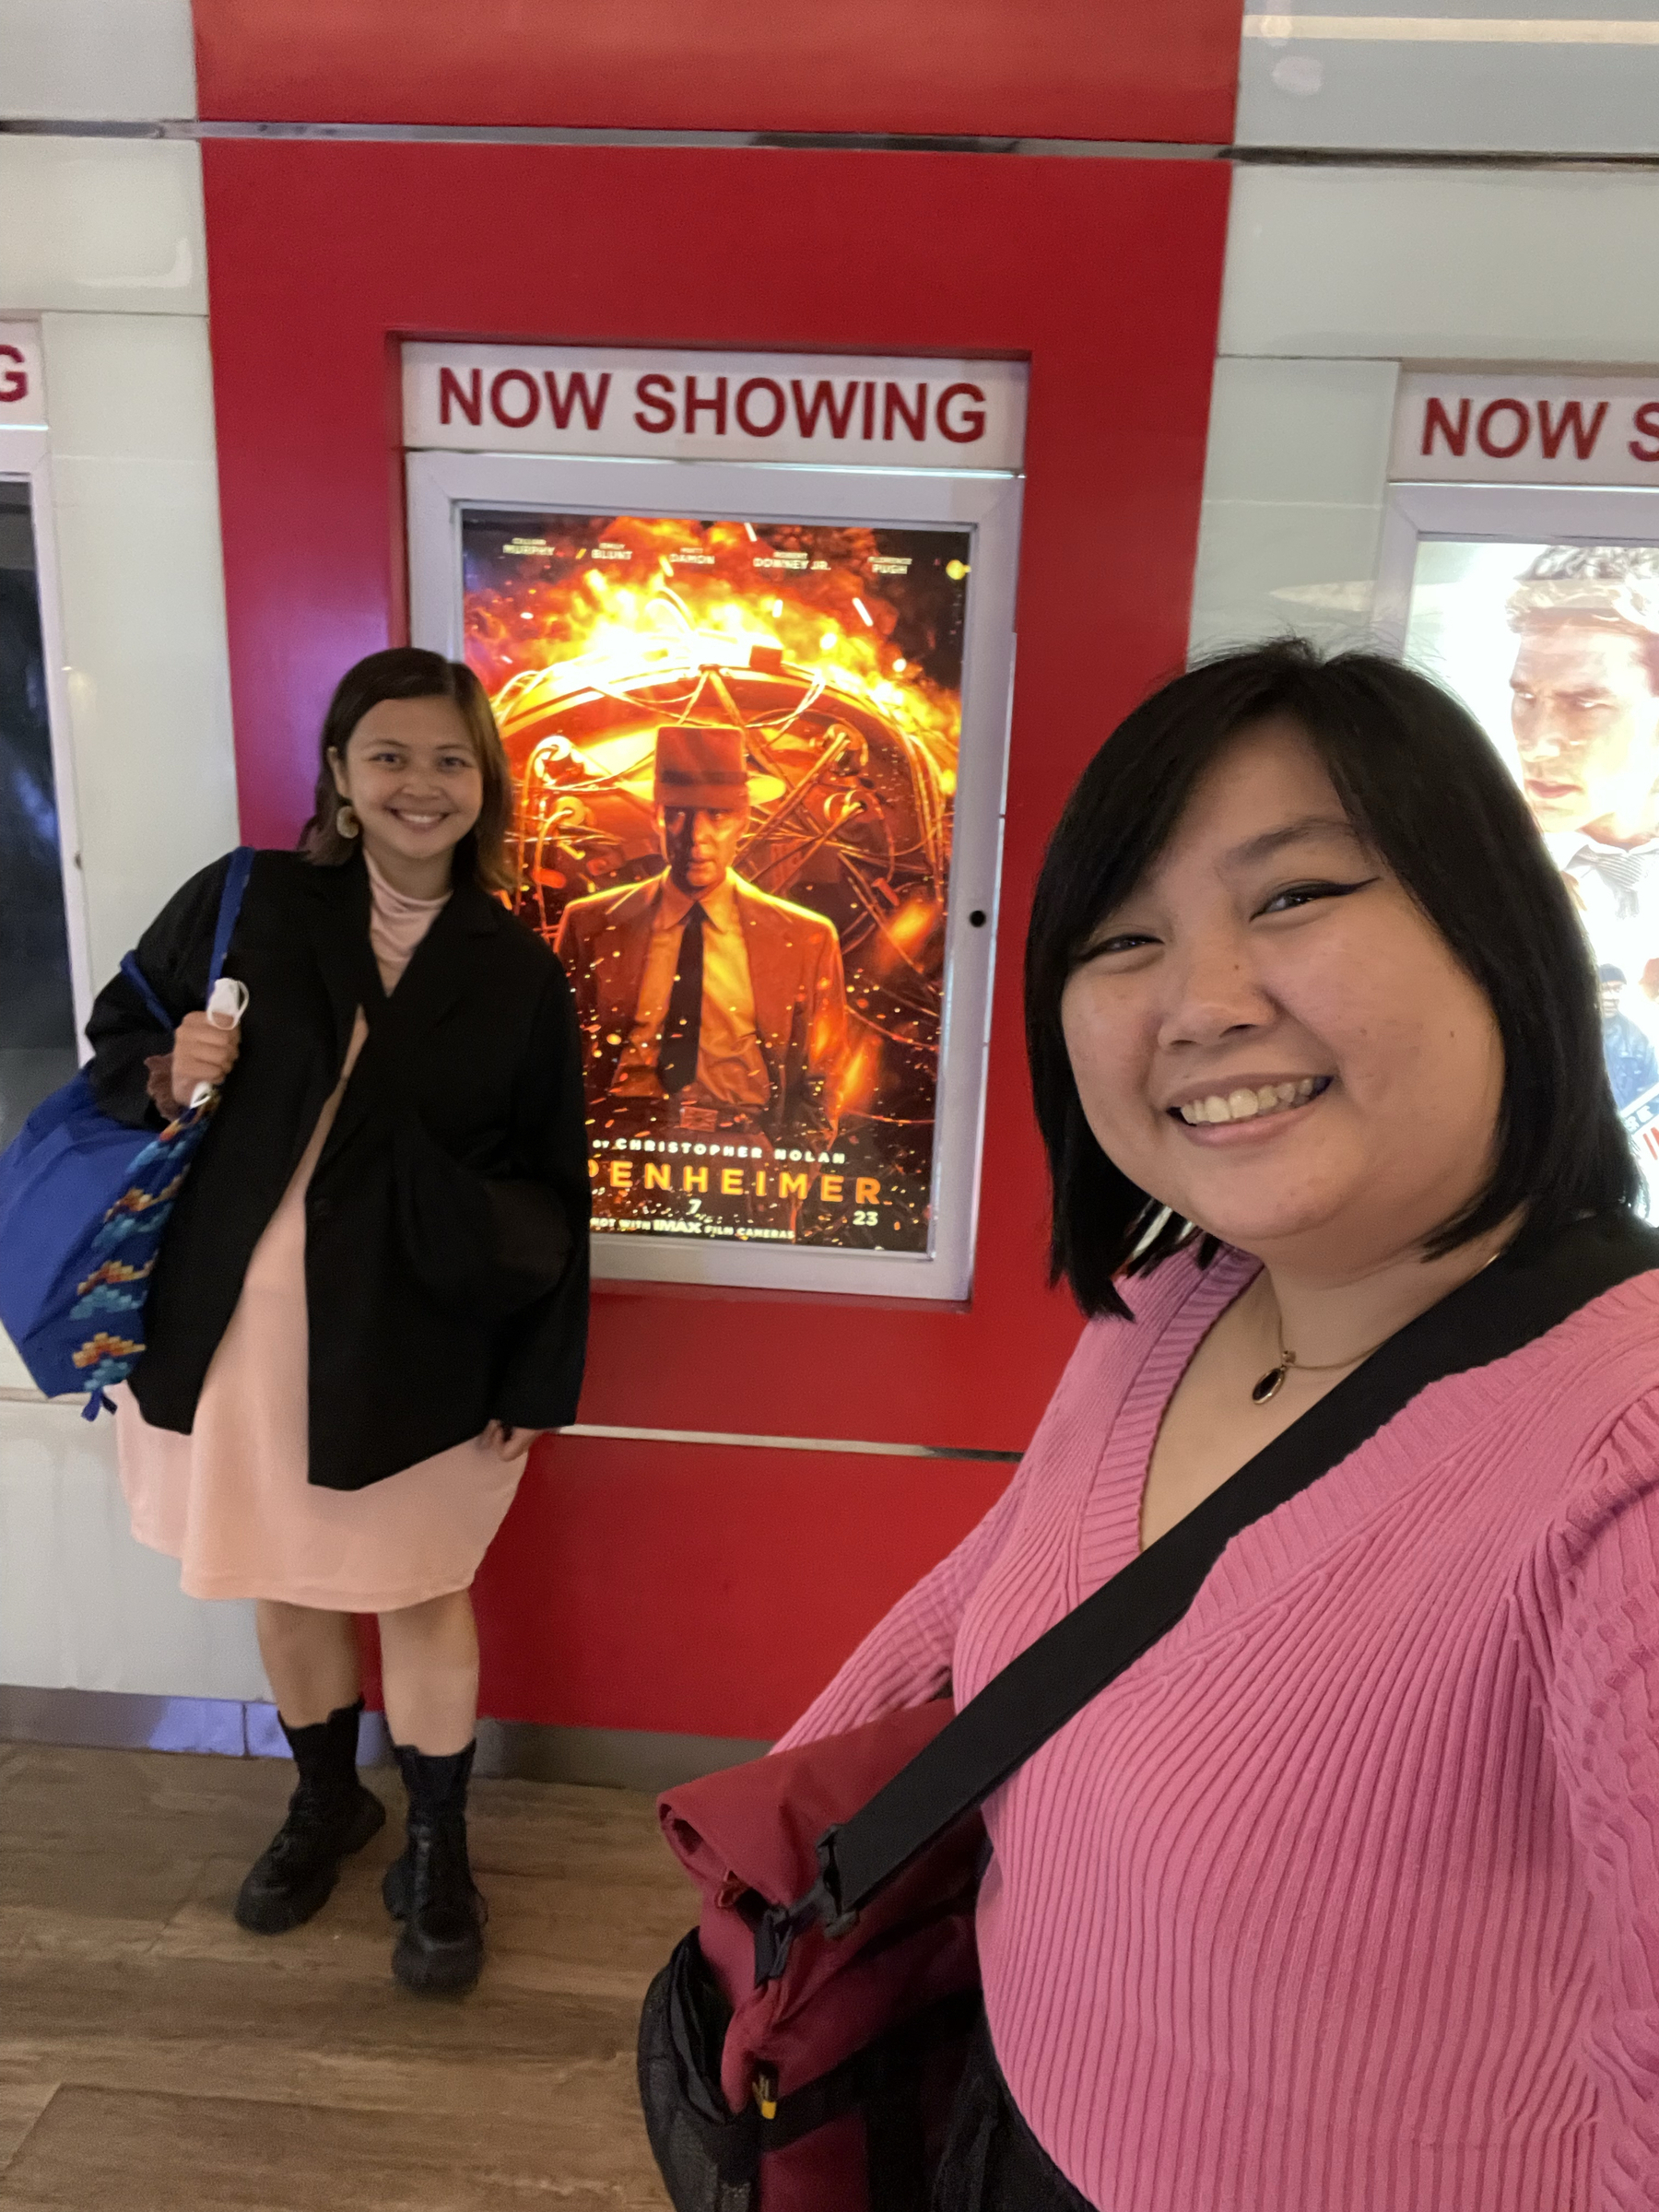 Karen and Chi posing next to the Oppenheimer movie poster.